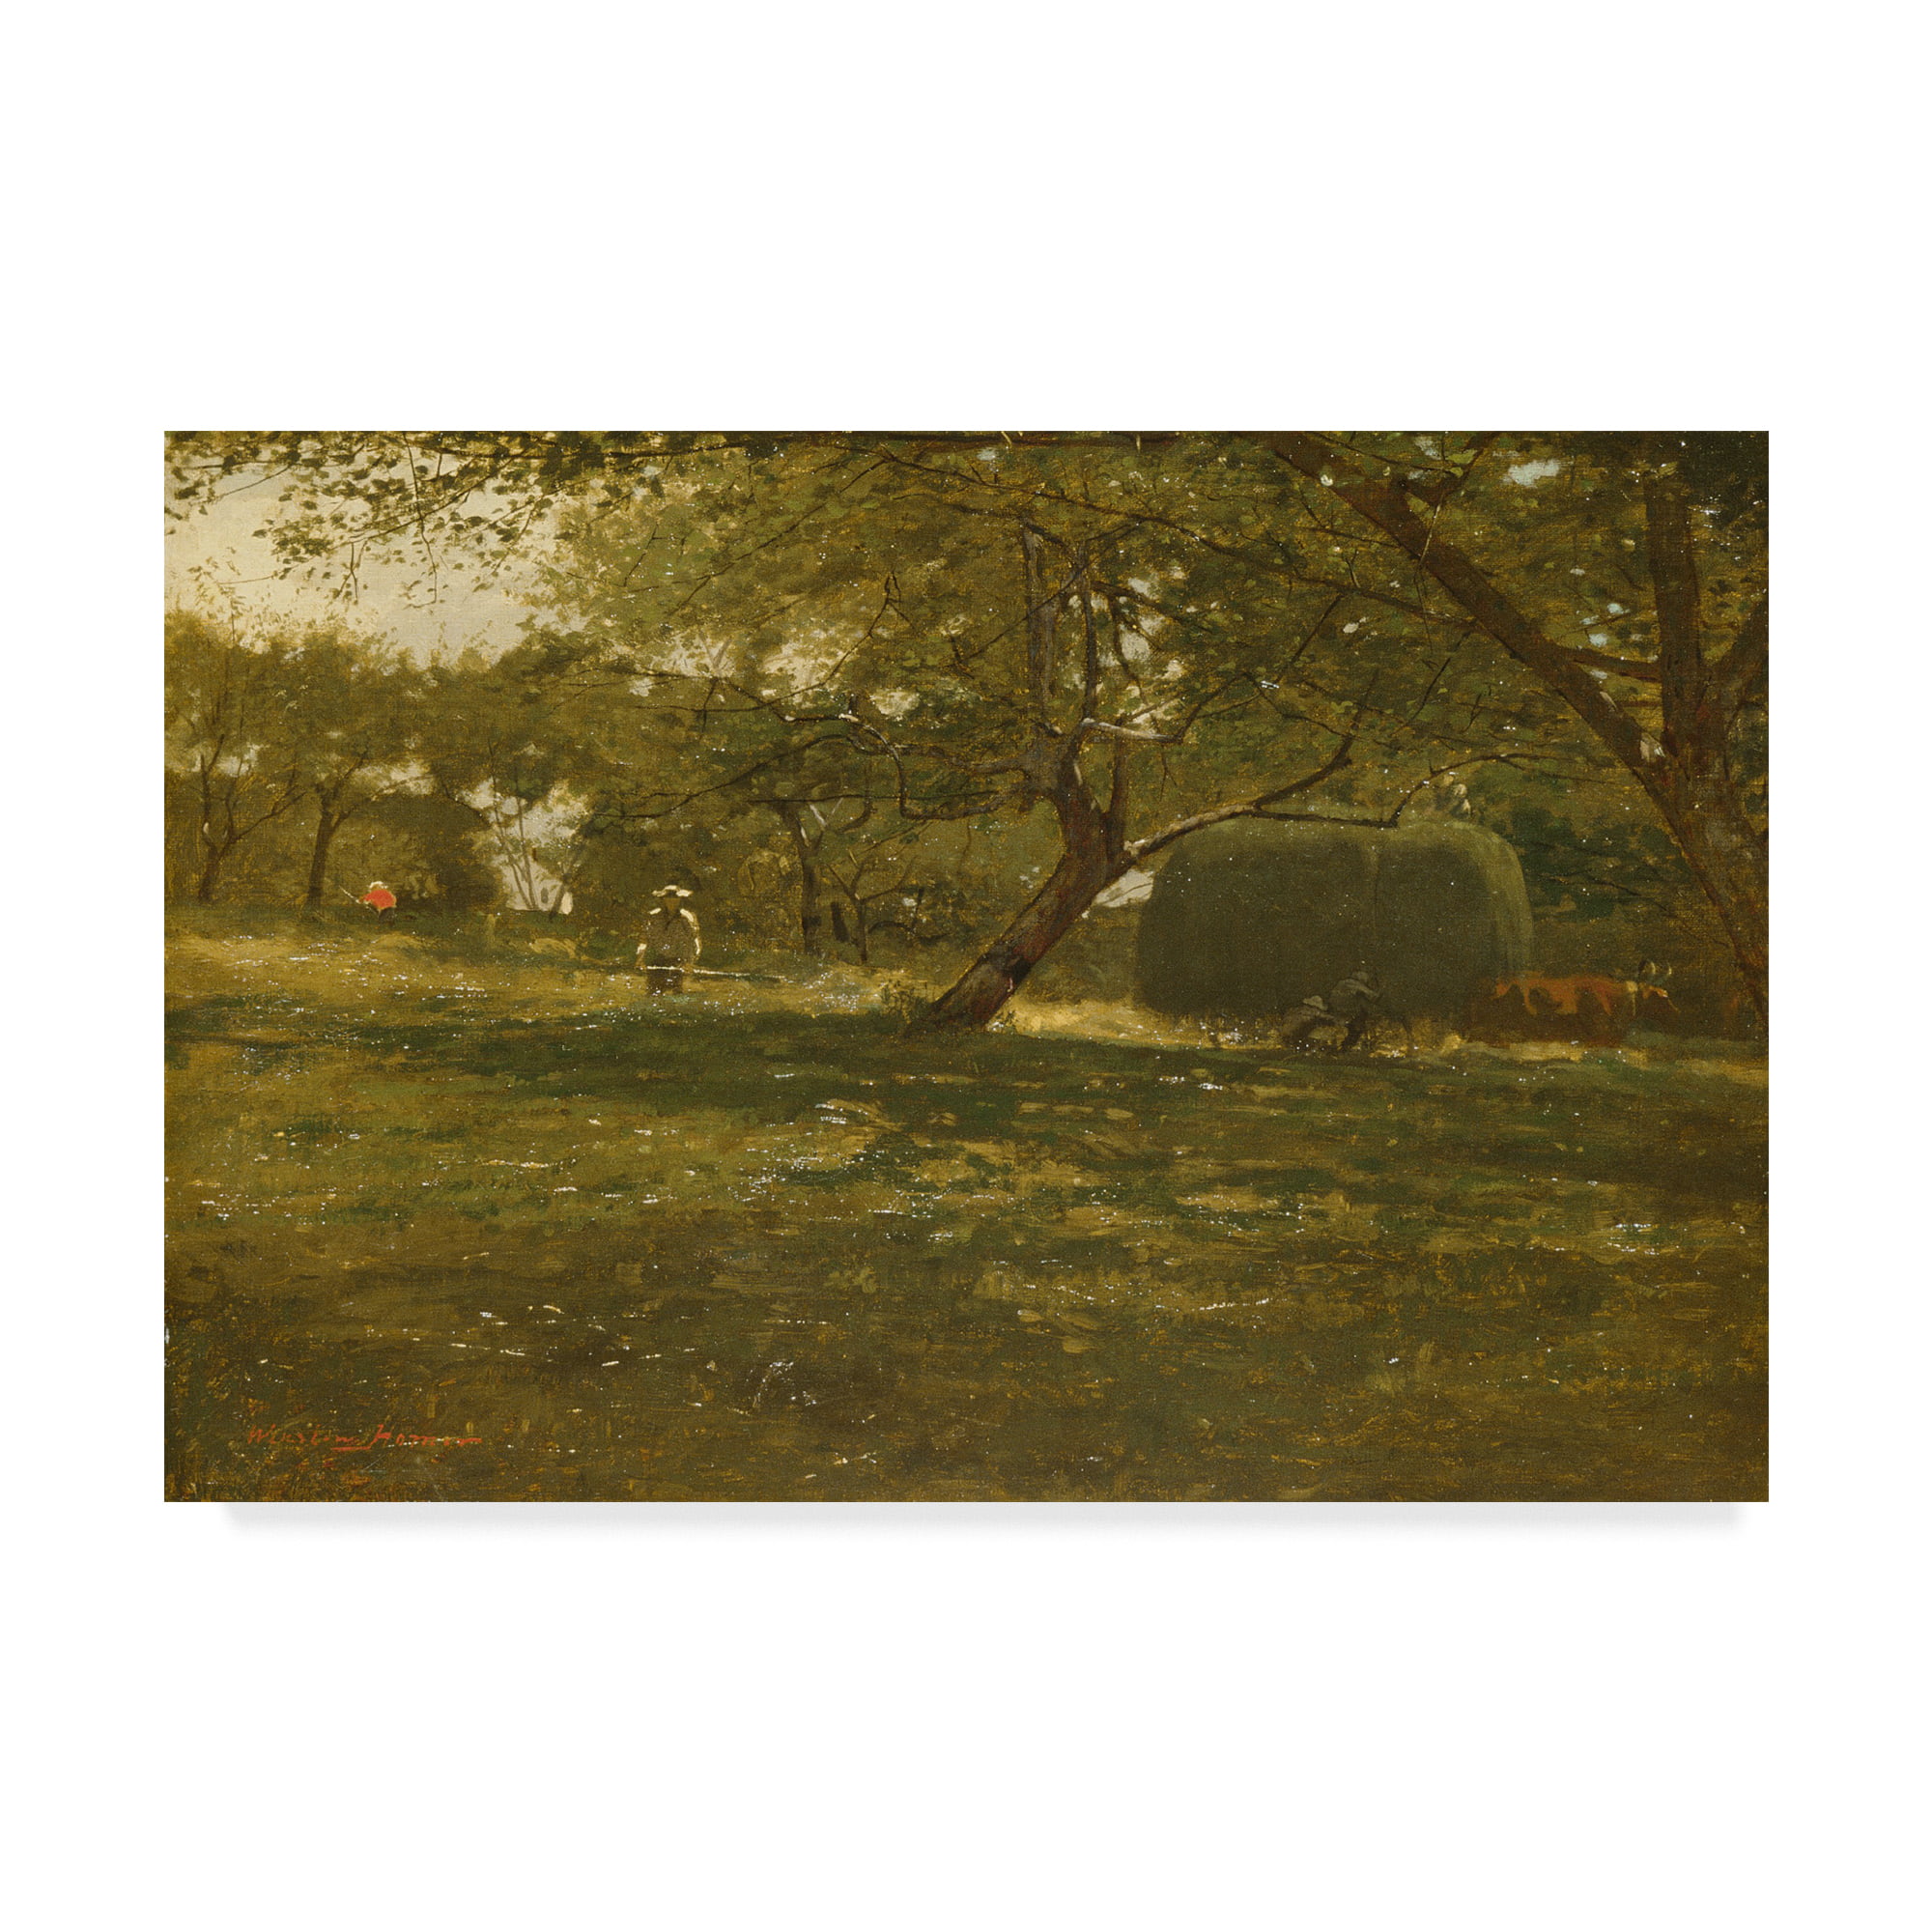 Woman and Elephant  by Winslow Homer  Paper Print Repro 